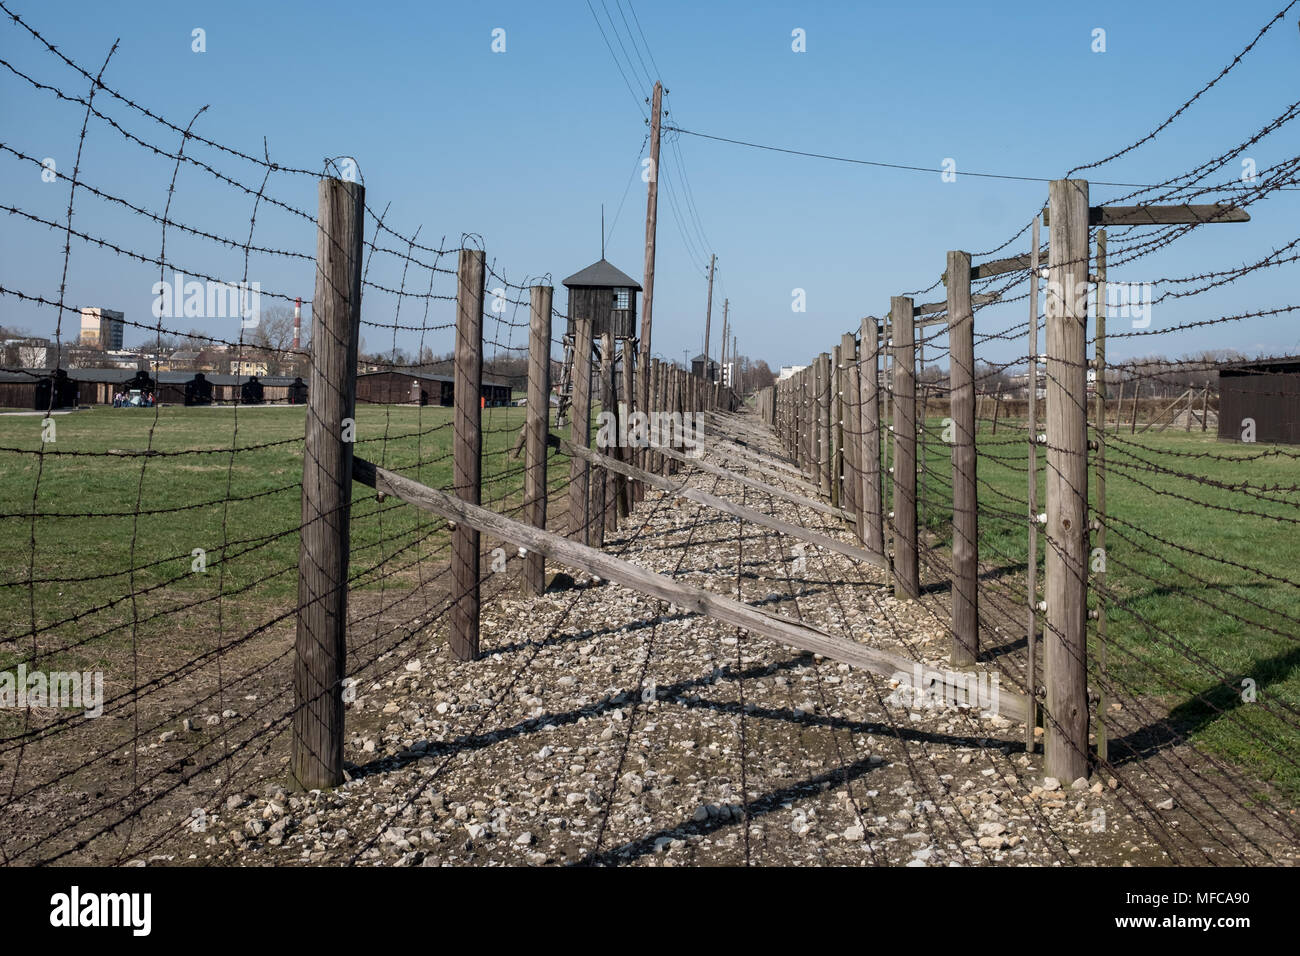 Lublin, Poland. Majdanek concentration camp. Second World War Nazi German concentration camp where Jews and other minorities were exterminated Stock Photo